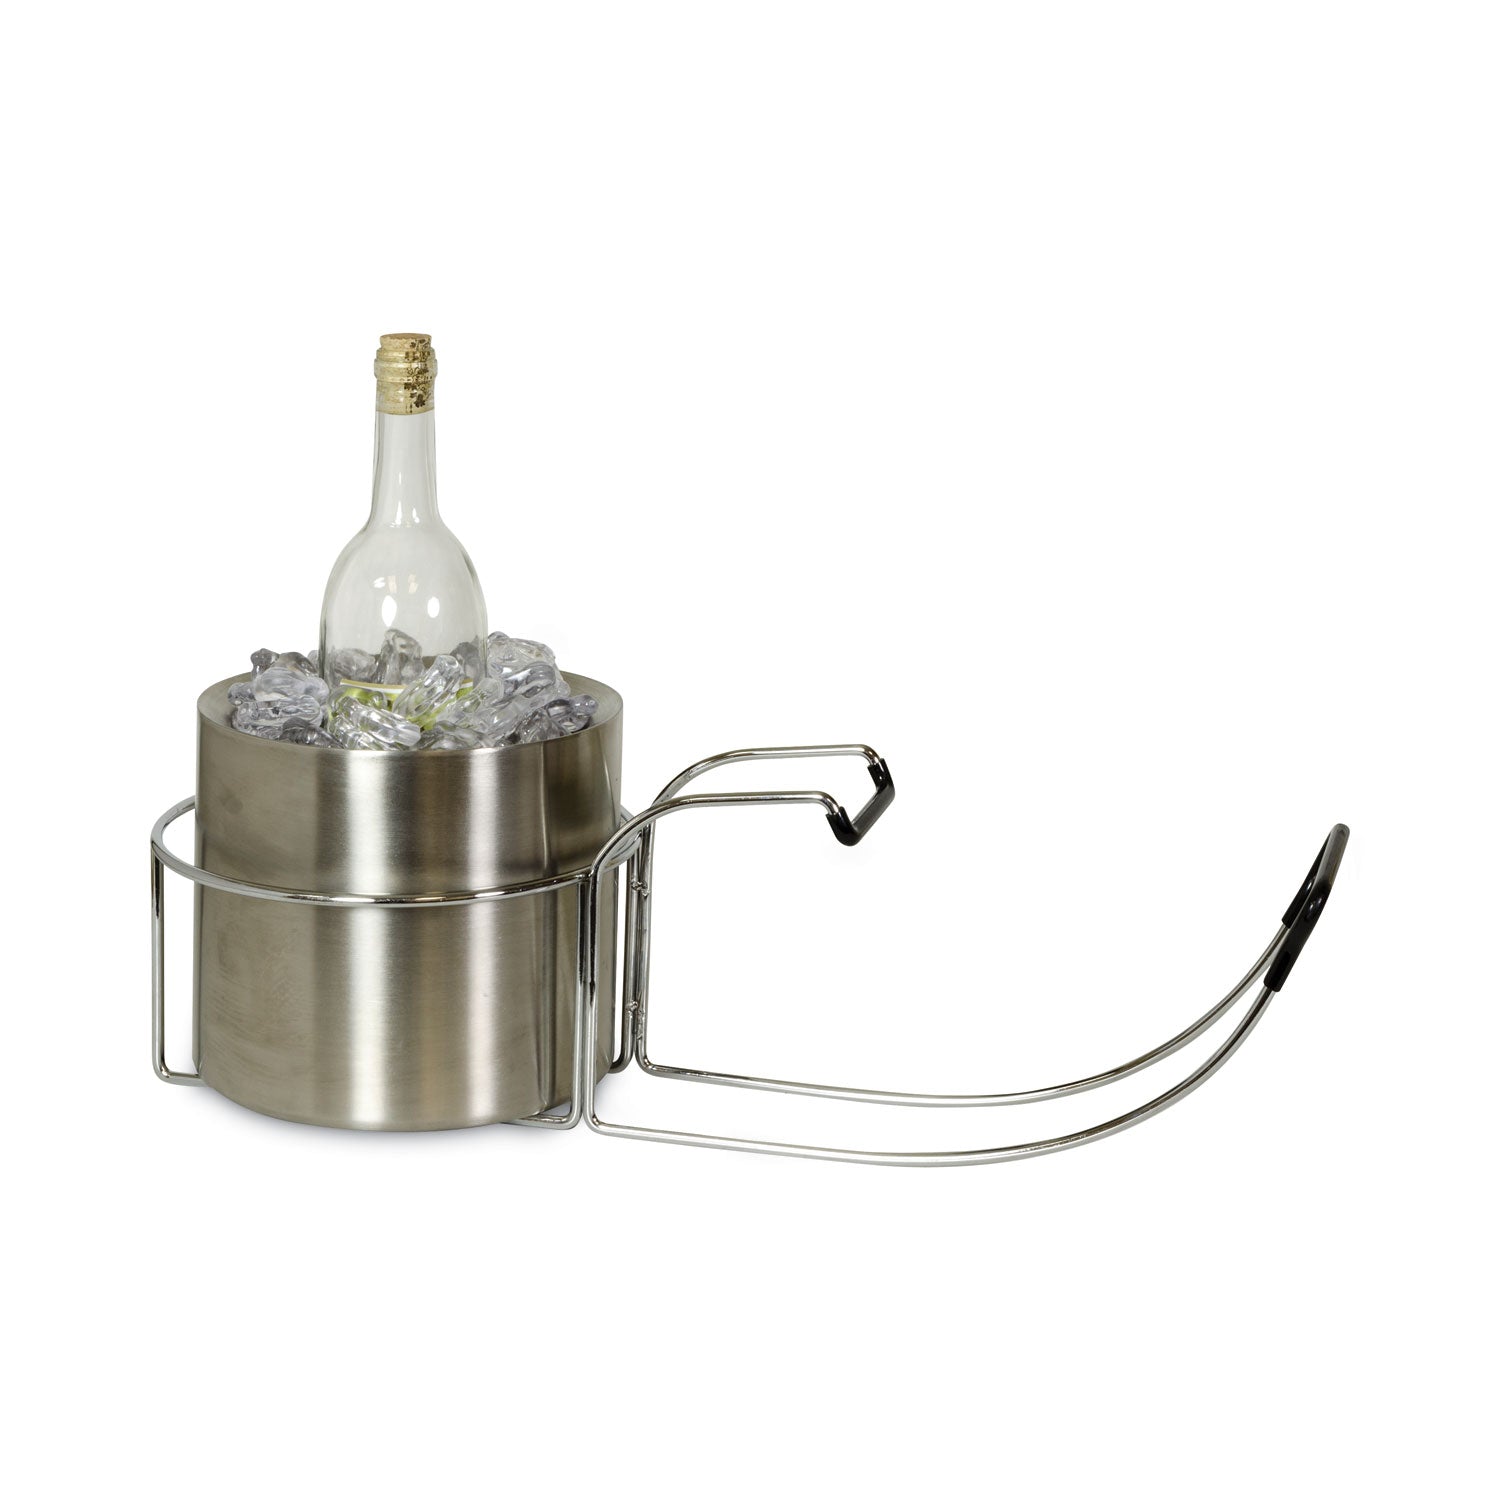 wine-by-your-side-steel-frame-red-wine-adapter-ice-bucket-16106-cu-in-stainless-steel_cli20014 - 3